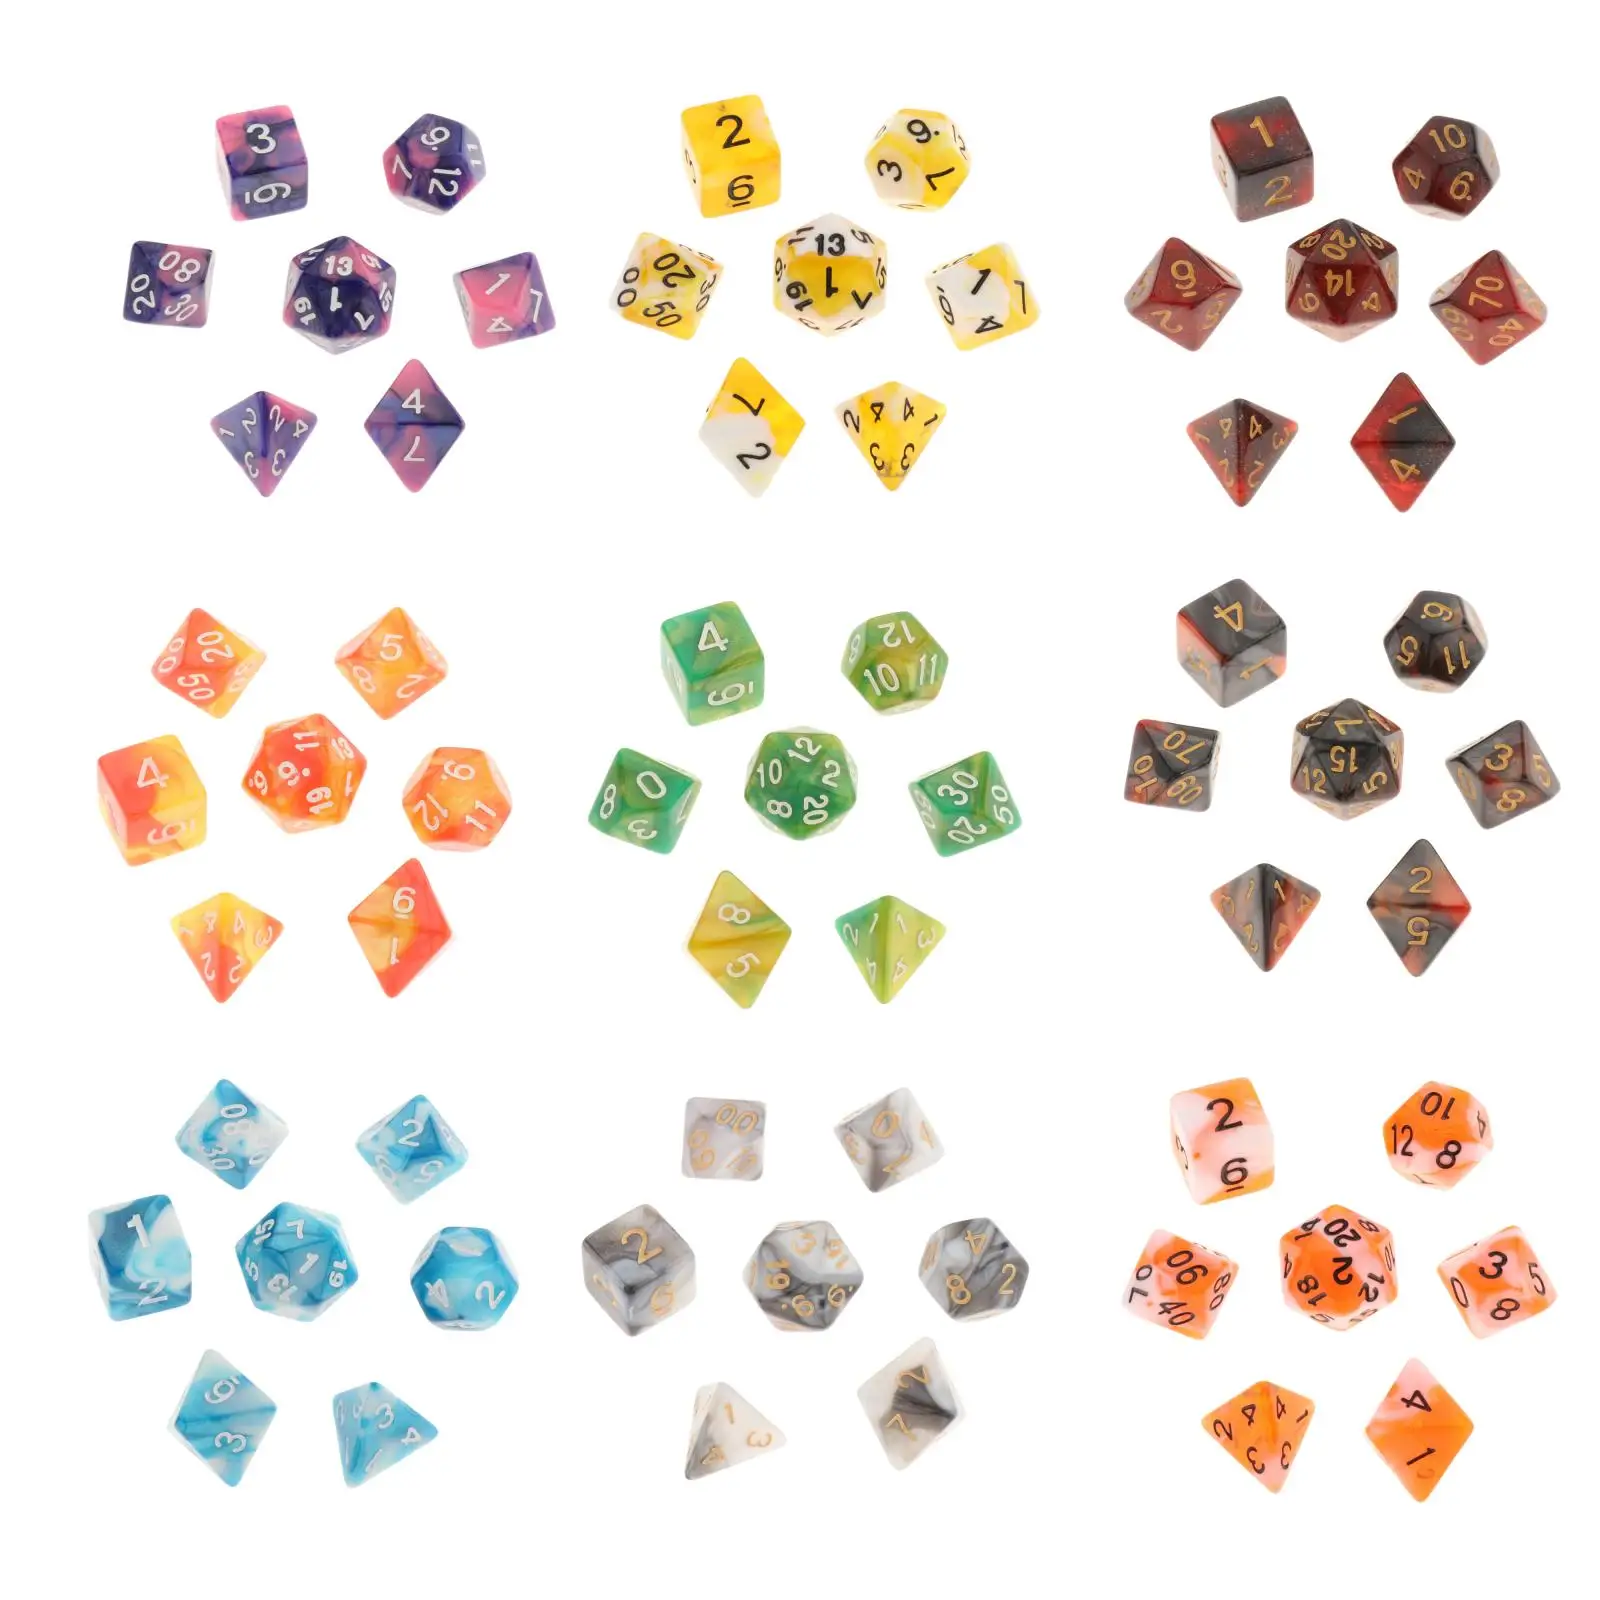 7x Metal Dice Set Polyhedral Dices Board Game Toys Party Casino Supplies #7 